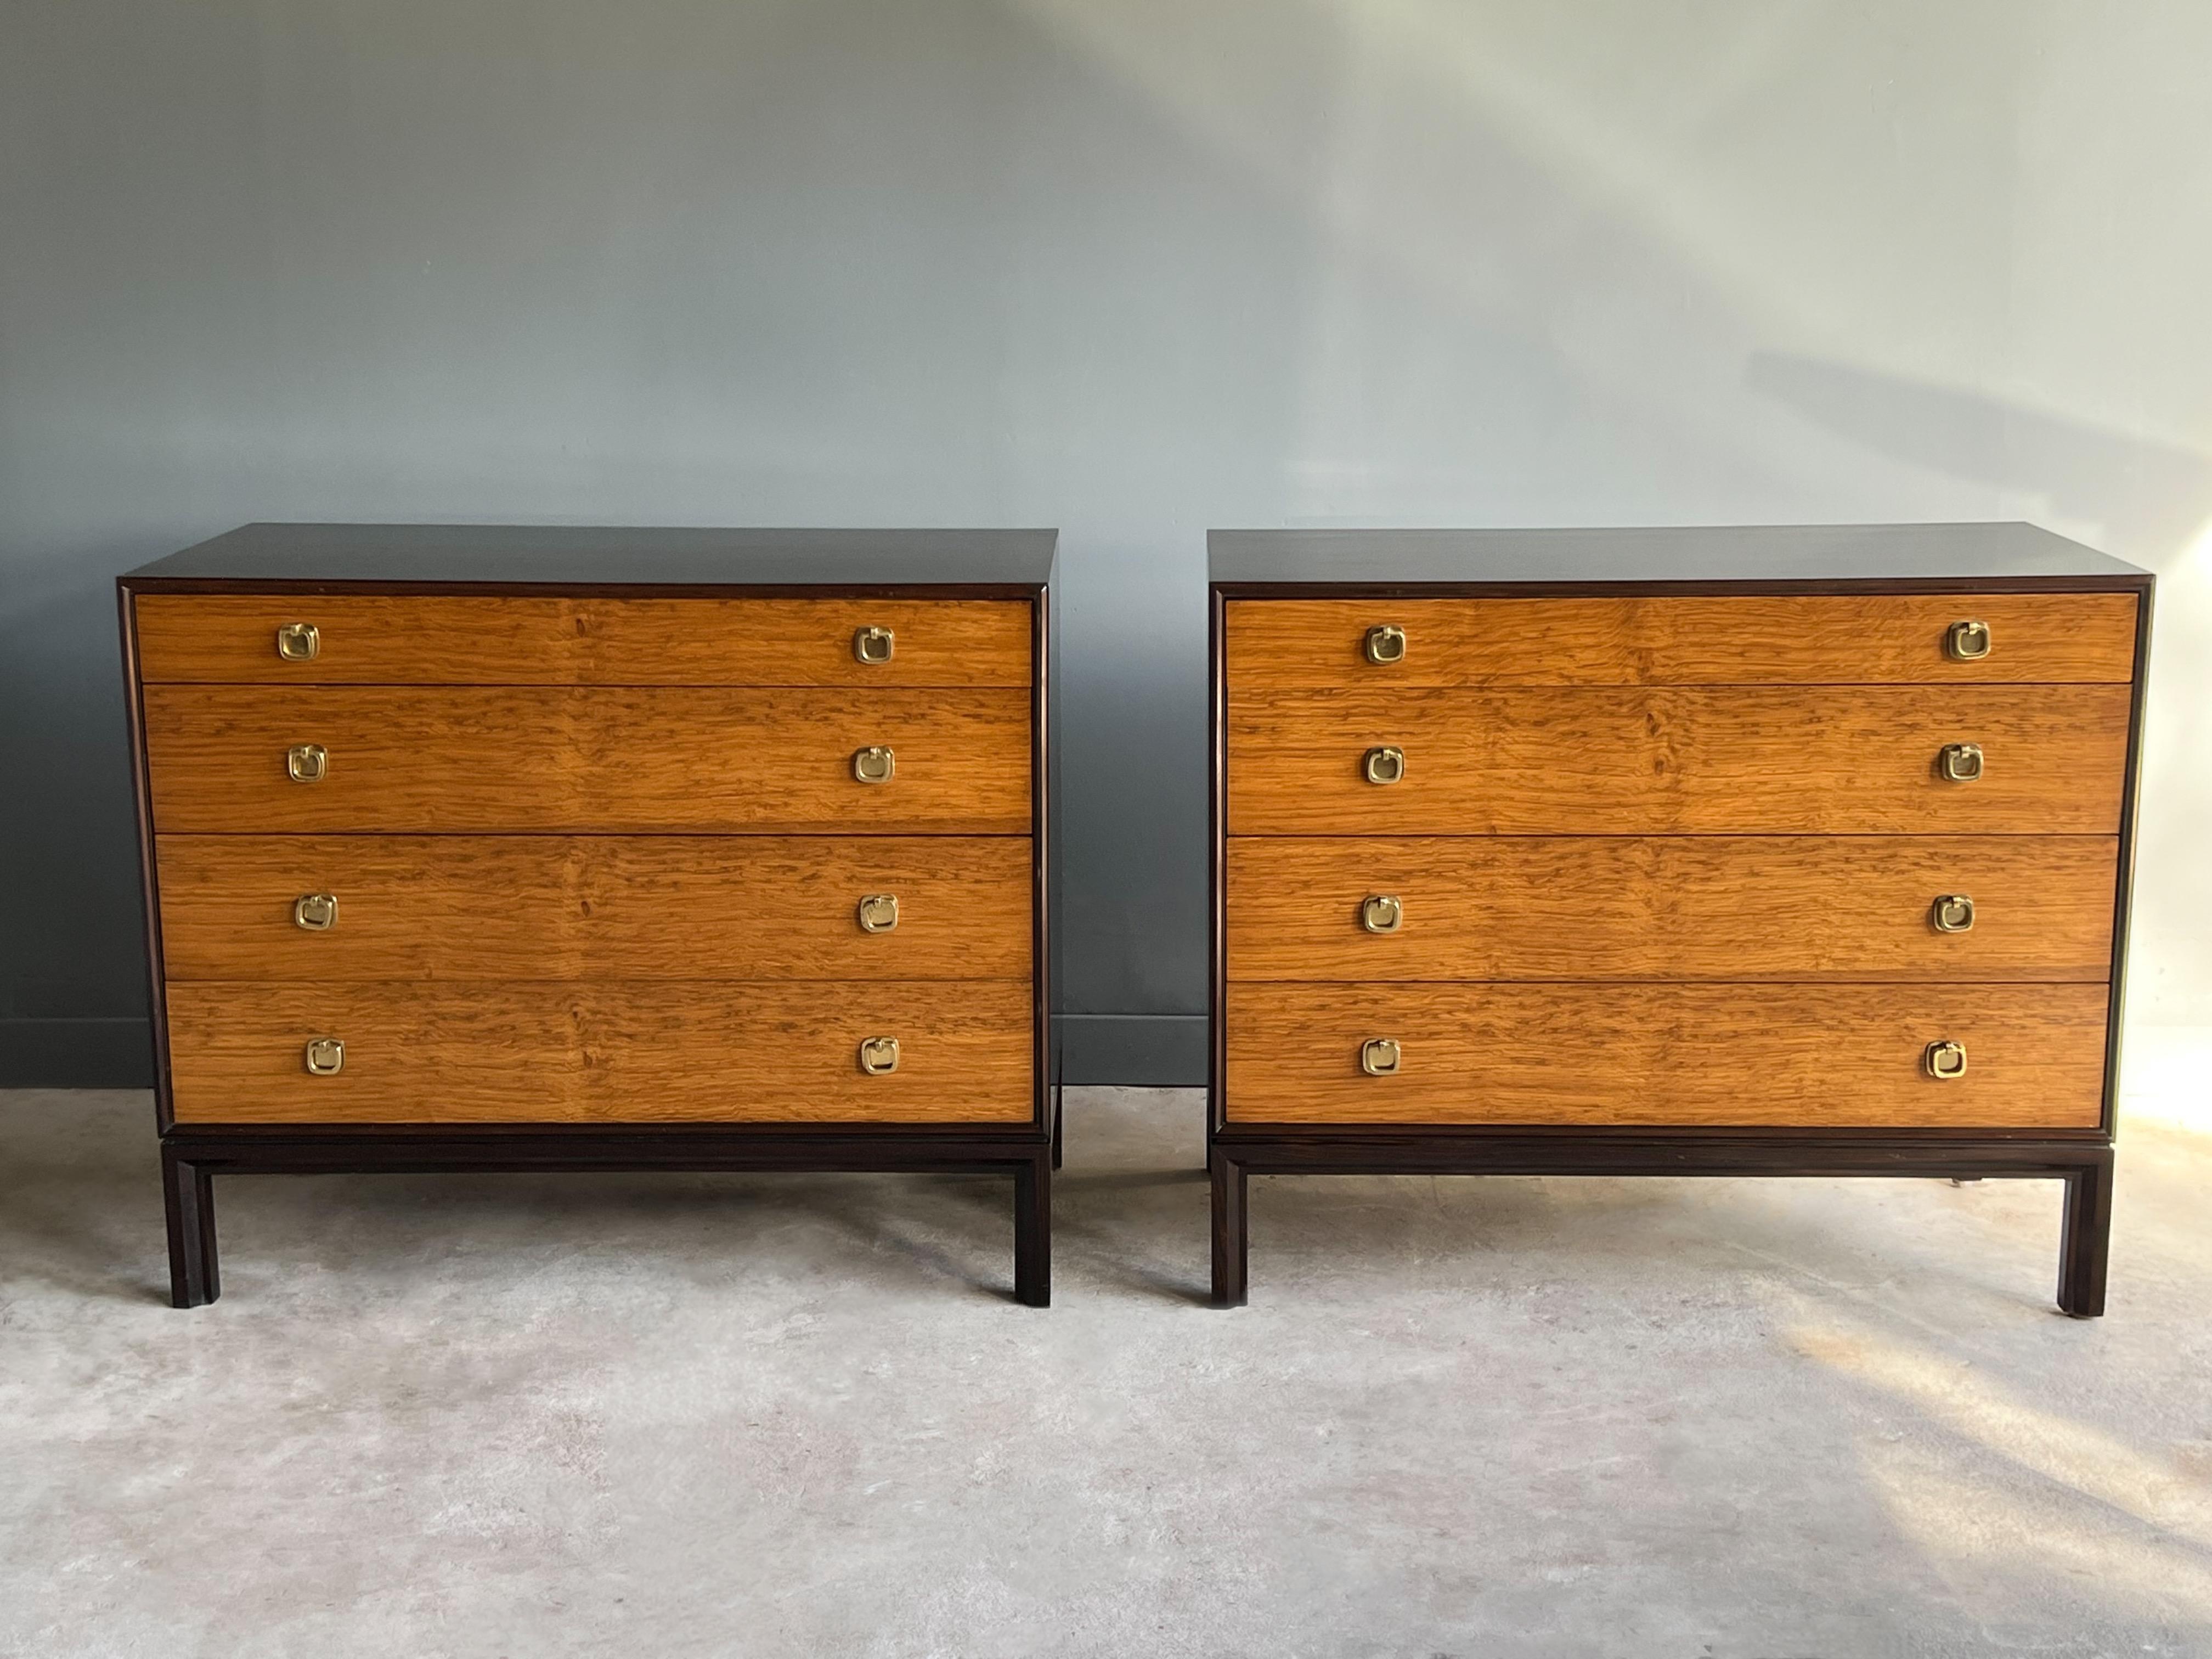 Pair of dresser chests designed by Edward Wormley for Dunbar Furniture, c. 1960s. Model 6720 features a stained ash outer case, solid rosewood edges and English oak drawer fronts with solid brass “H” pulls. Wonderful grain flairs on drawers. It’s